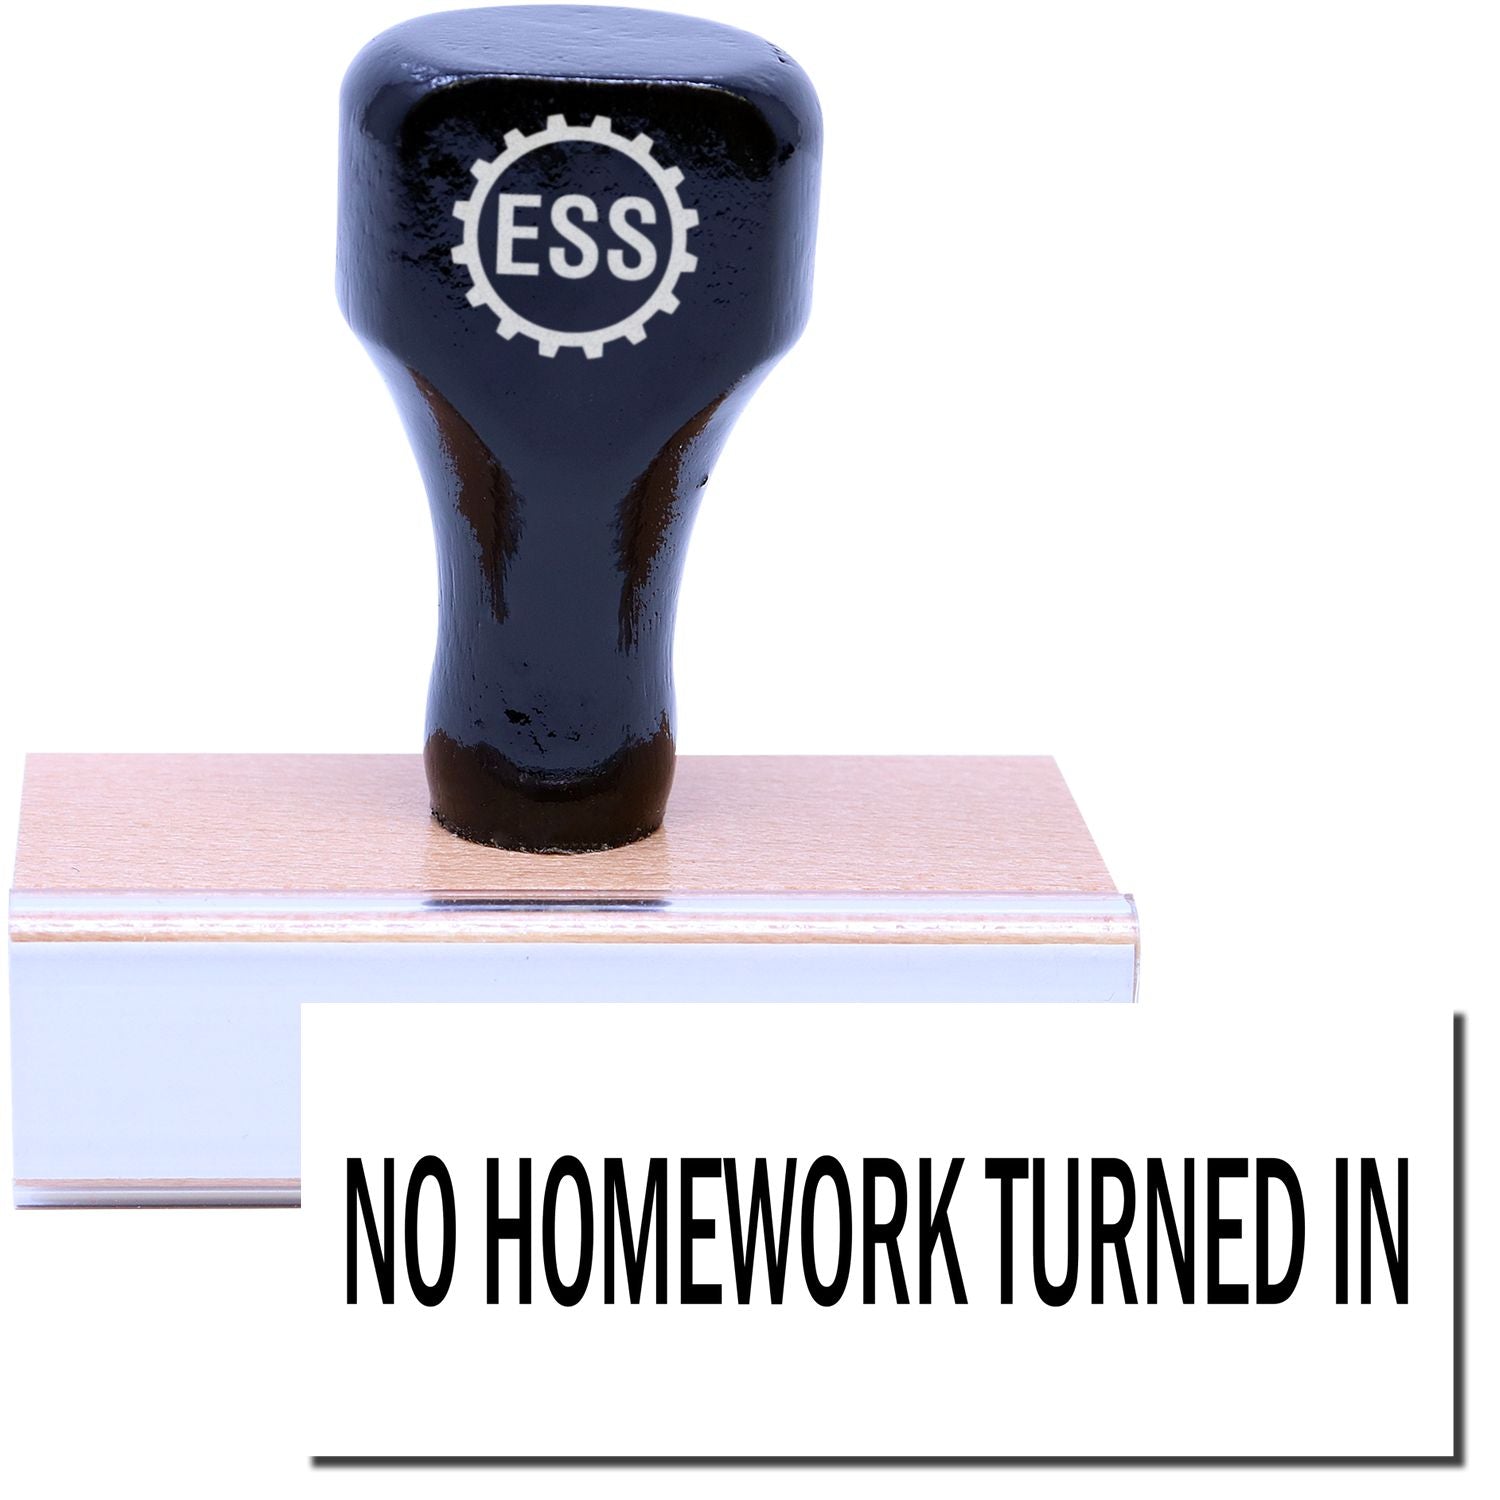 A stock office rubber stamp with a stamped image showing how the text "NO HOMEWORK TURNED IN" is displayed after stamping.